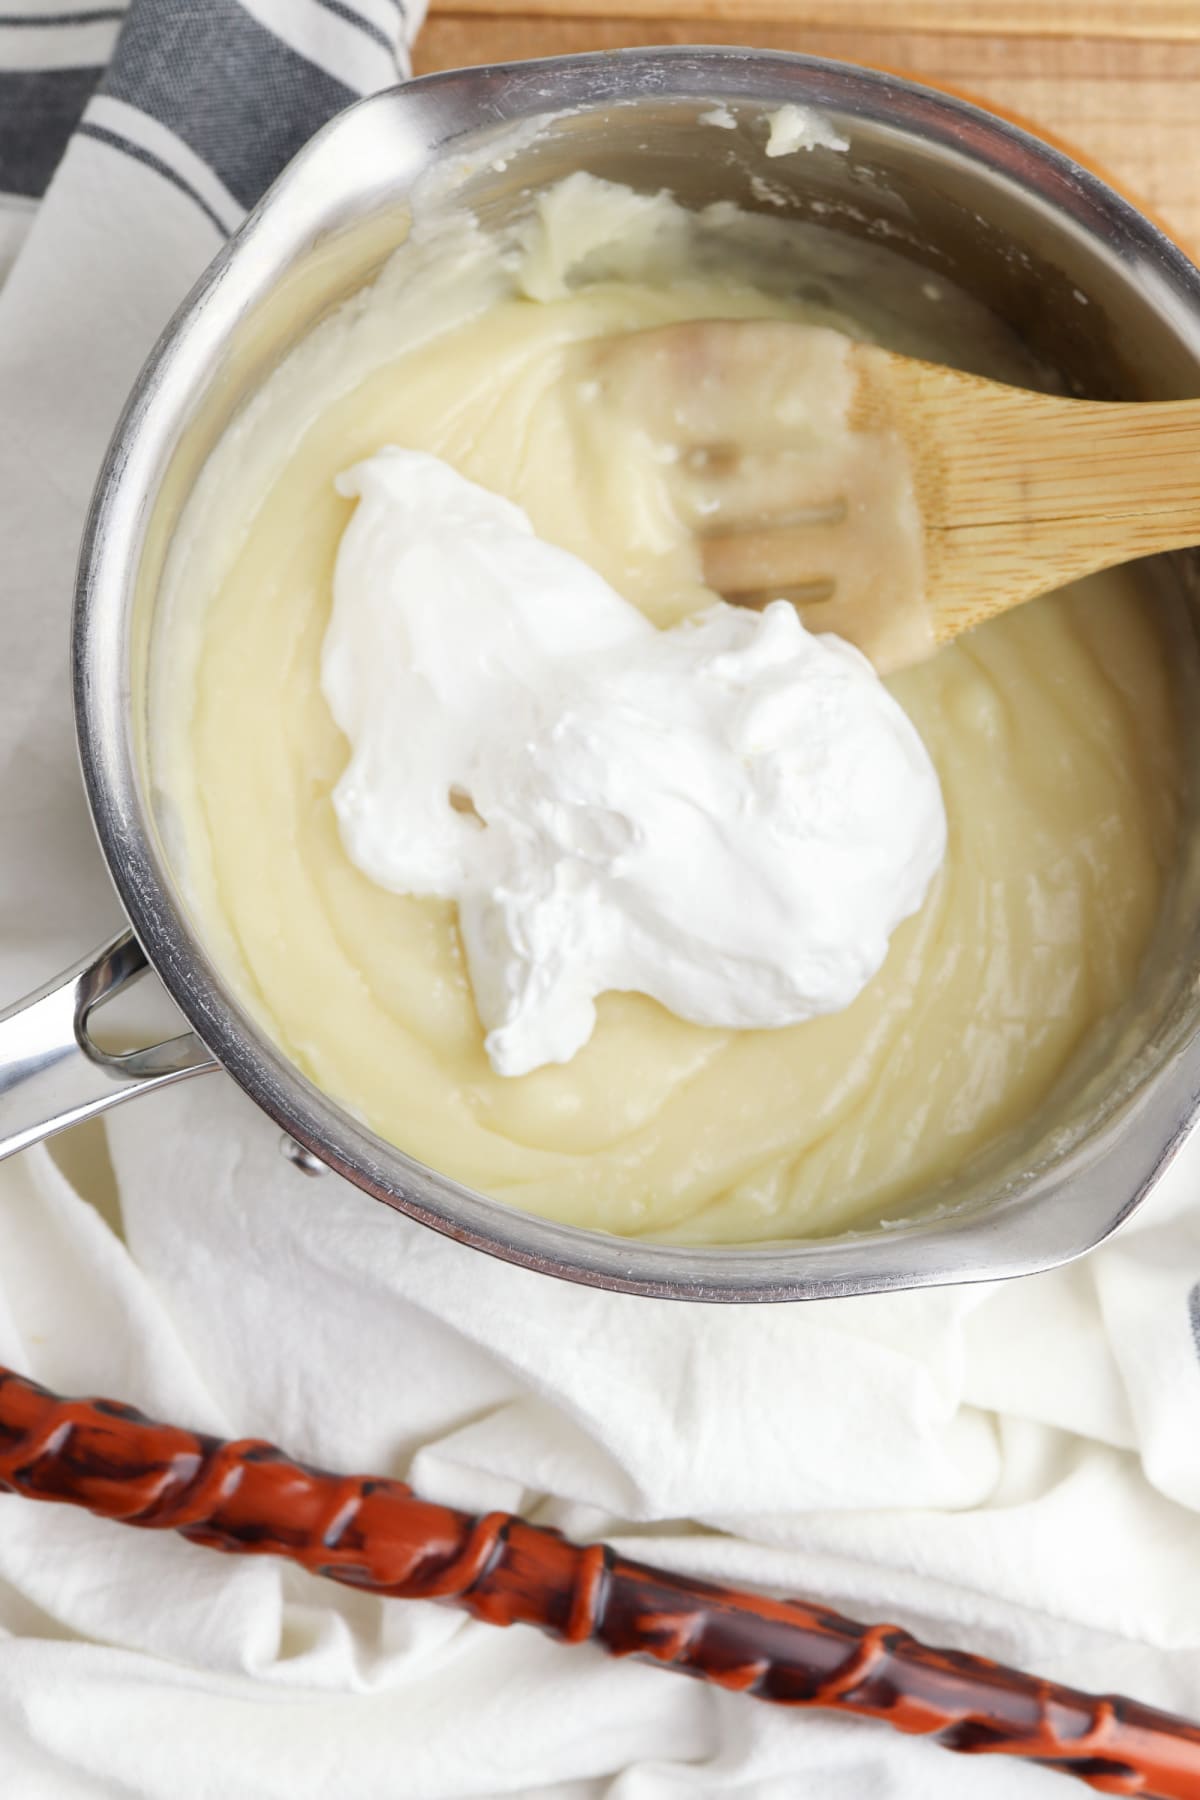 Marshmallow creme and vanilla extract stirred into white chocolate